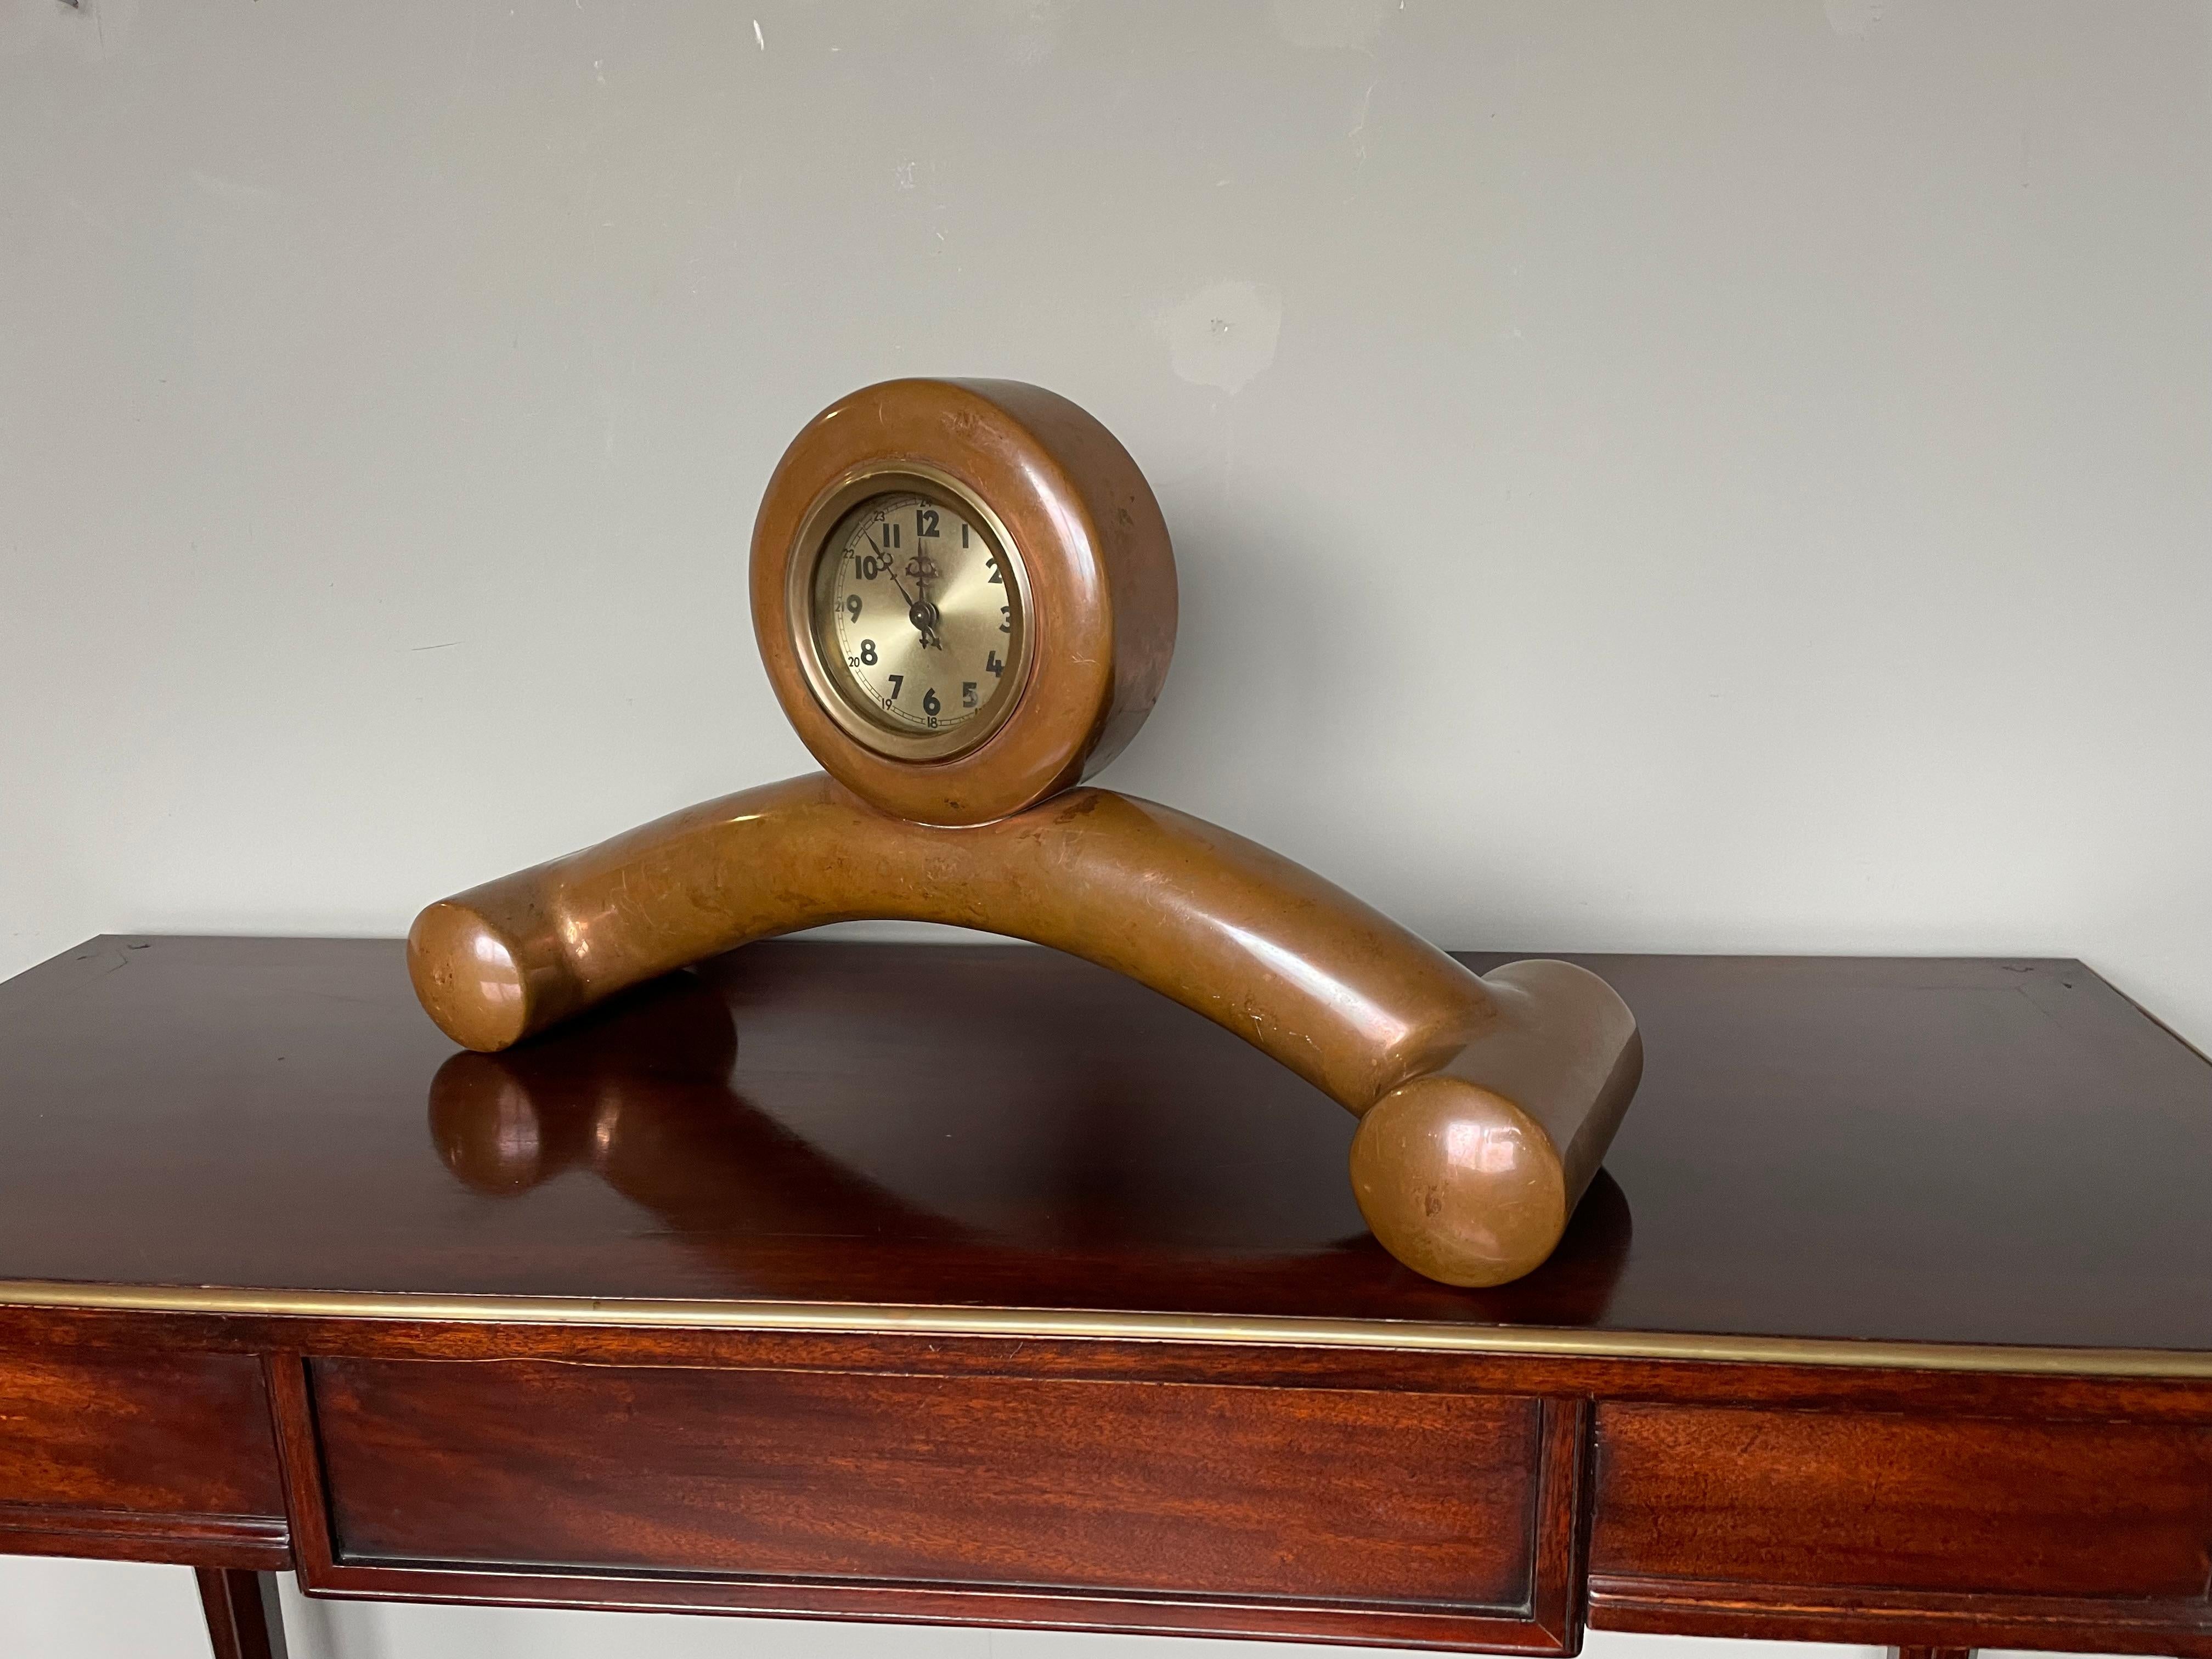 Forged Unique, Stylish & All Handcrafted Copper Art Deco Style Mantel or Table Clock For Sale